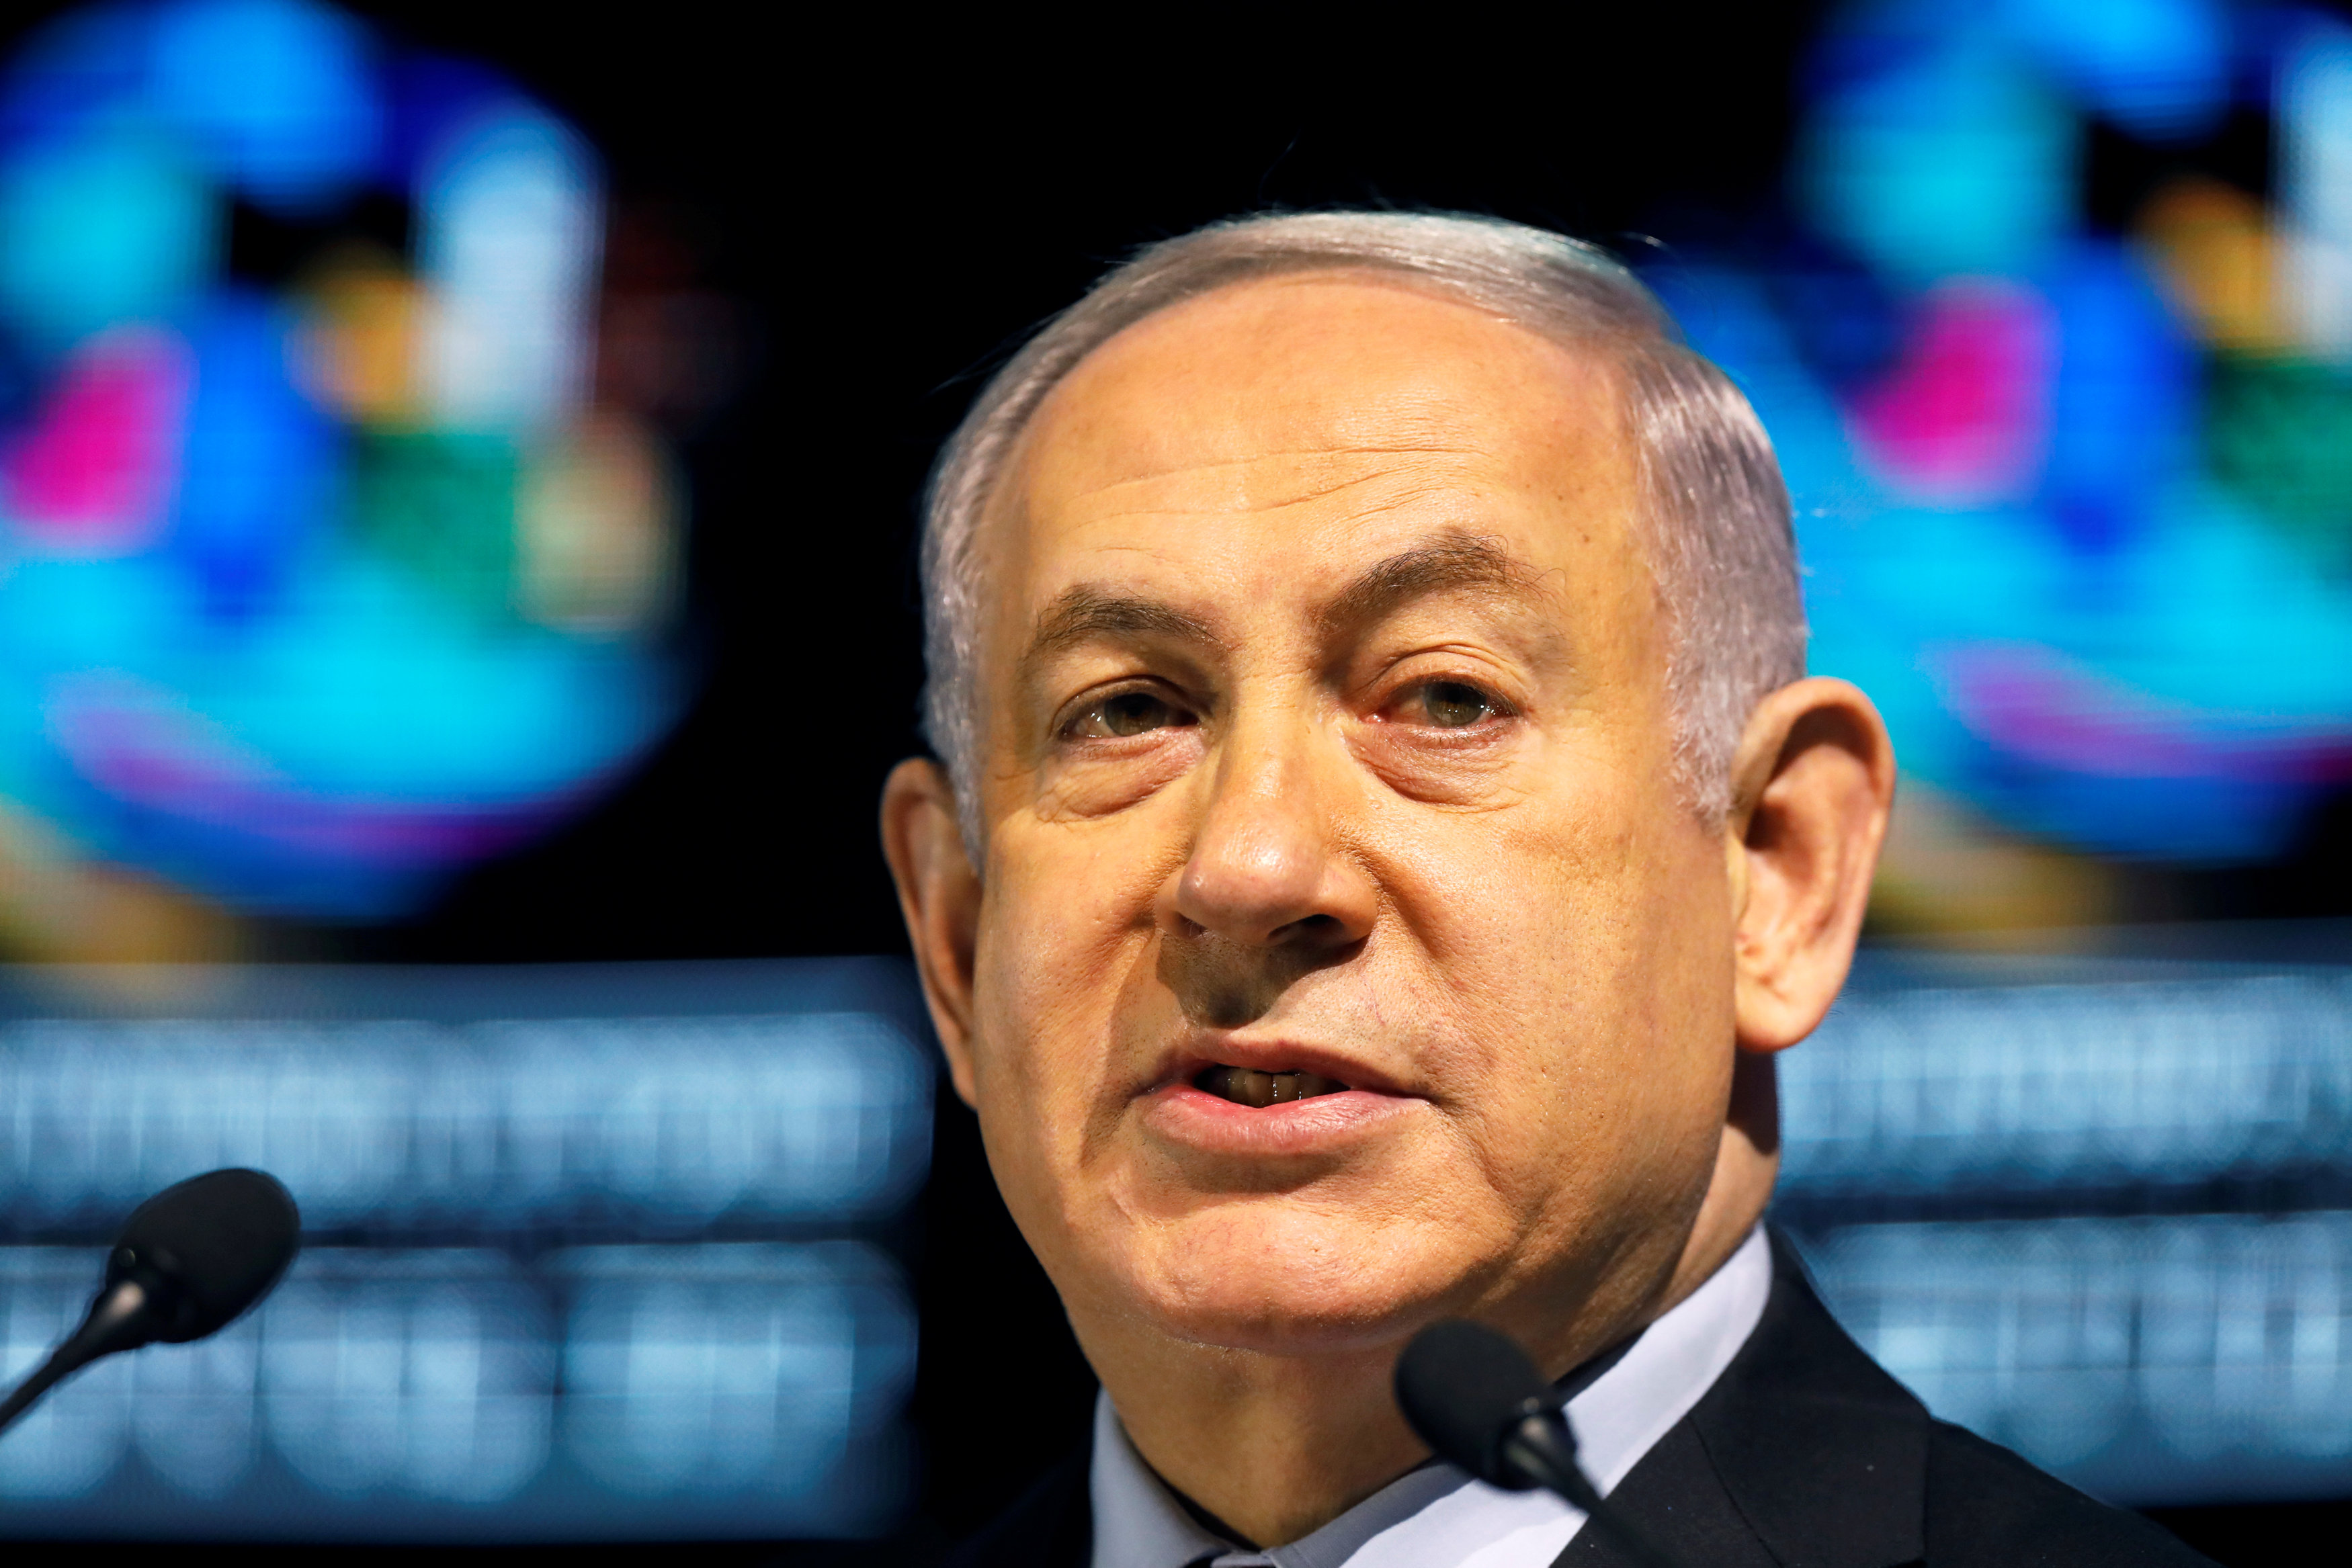 Following bribery allegations, coalition to stick with Netanyahu